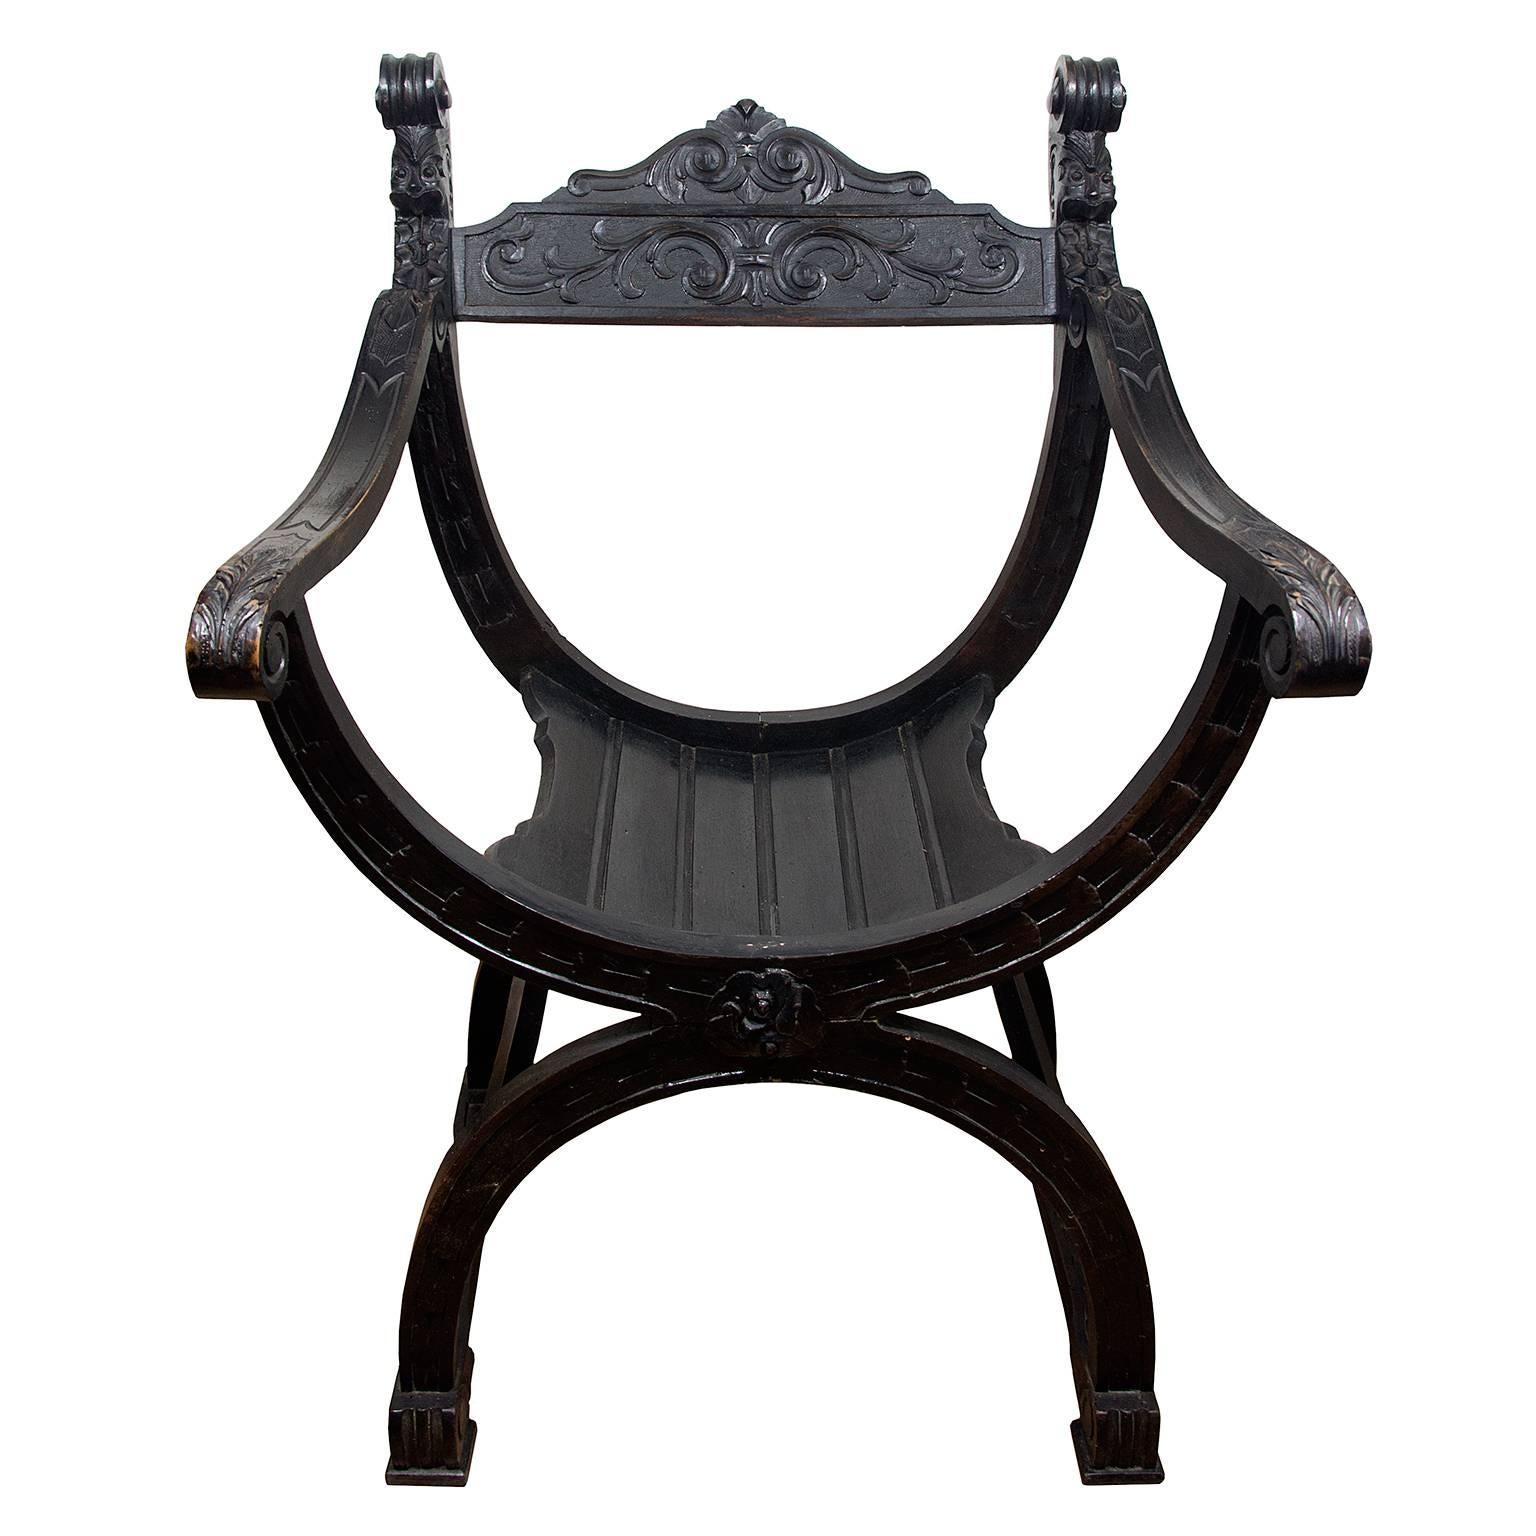 Beautiful typical Florentine neo-Renaissance carved wood Dantesca chair.
Very good vintage condition (please see photos). 

Measurements:
Height 87 cm / 34.3 in
Width 60 cm / 24 in
Depth 38.5 / 15 in
Seat height 38 / 15 in


Dantesca is a